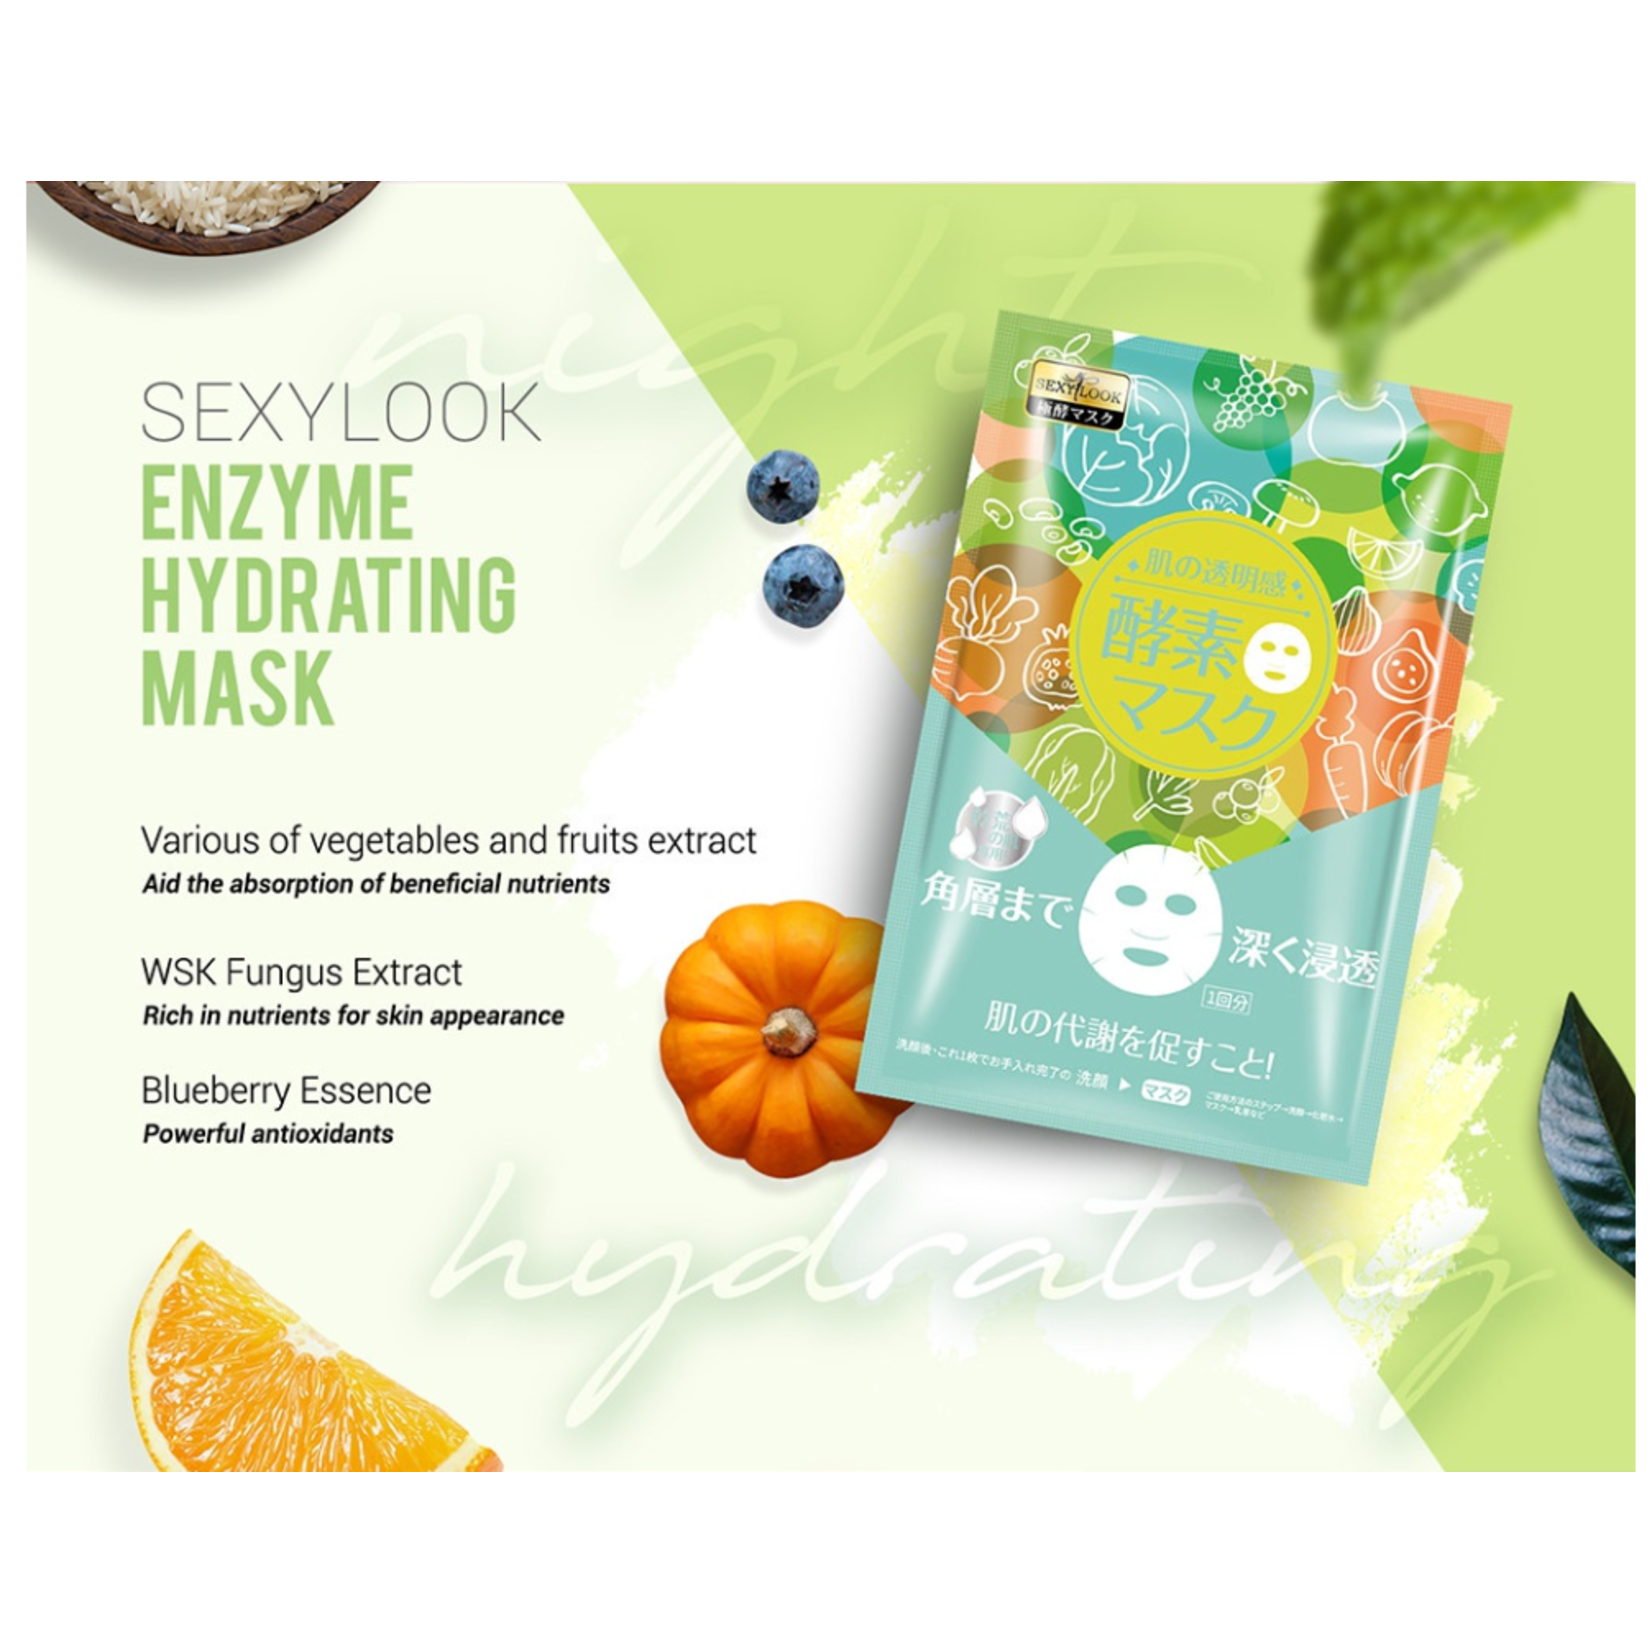 SEXYLOOK Enzyme Hydrating Facial Mask